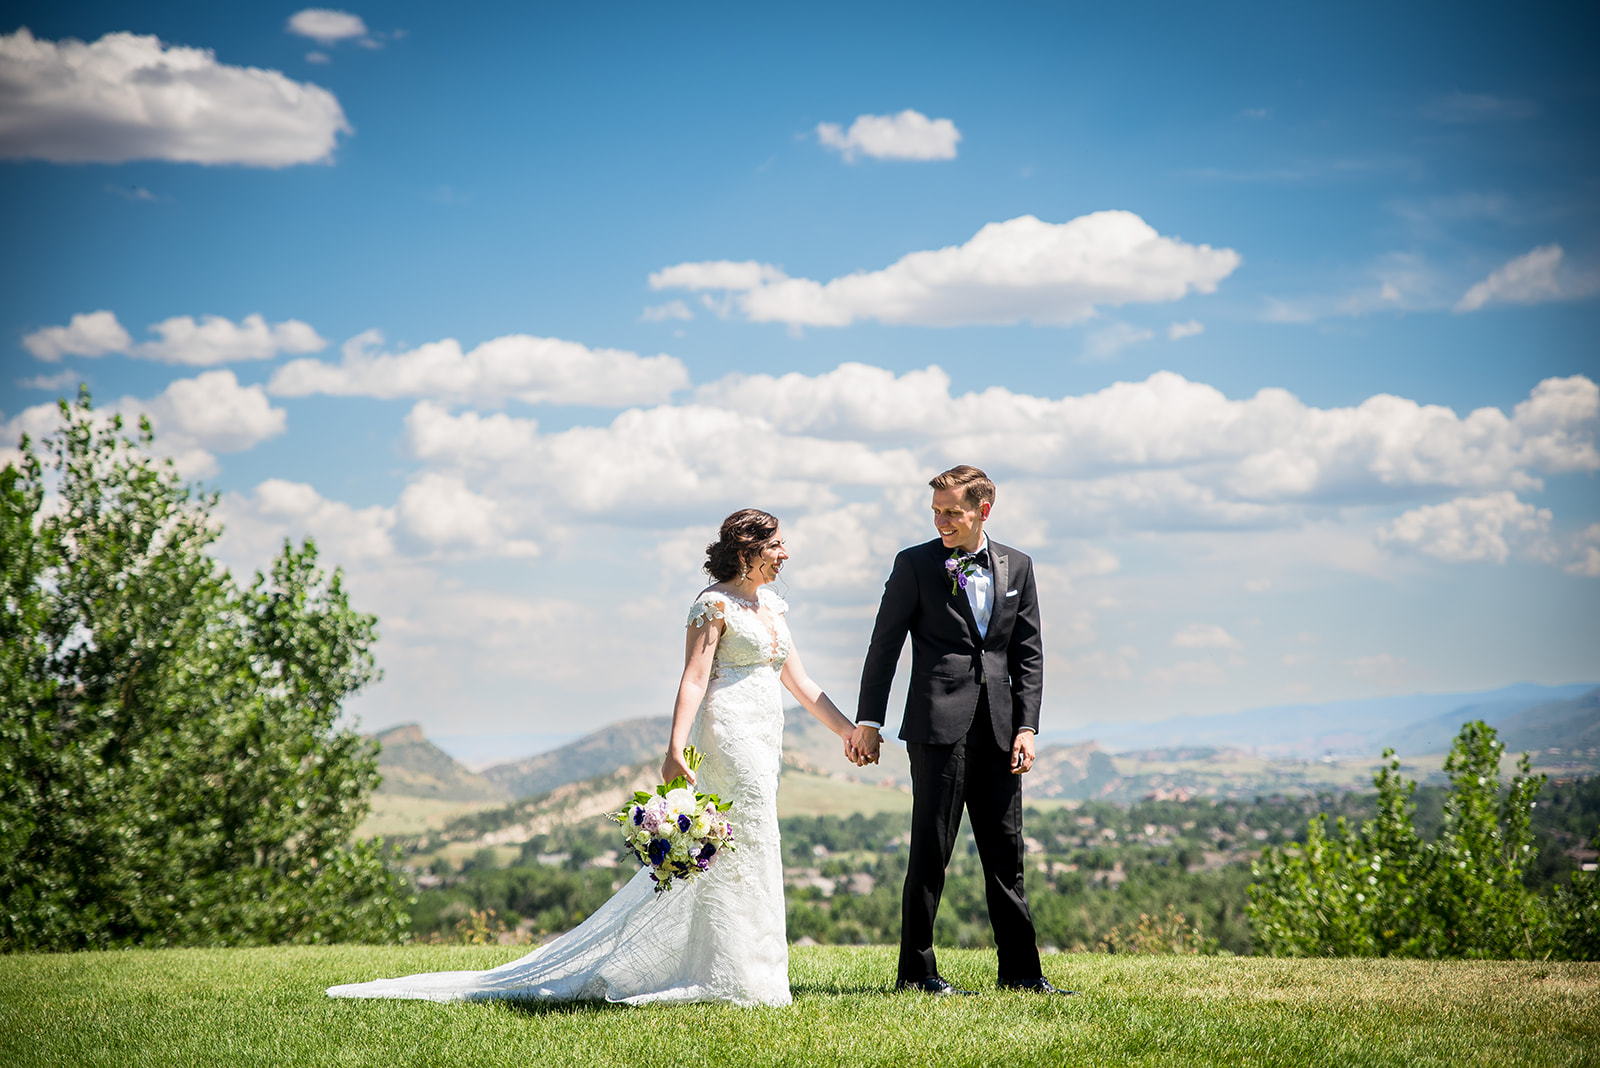 A groom leads his bride across a field of grass with mountain views in the background.